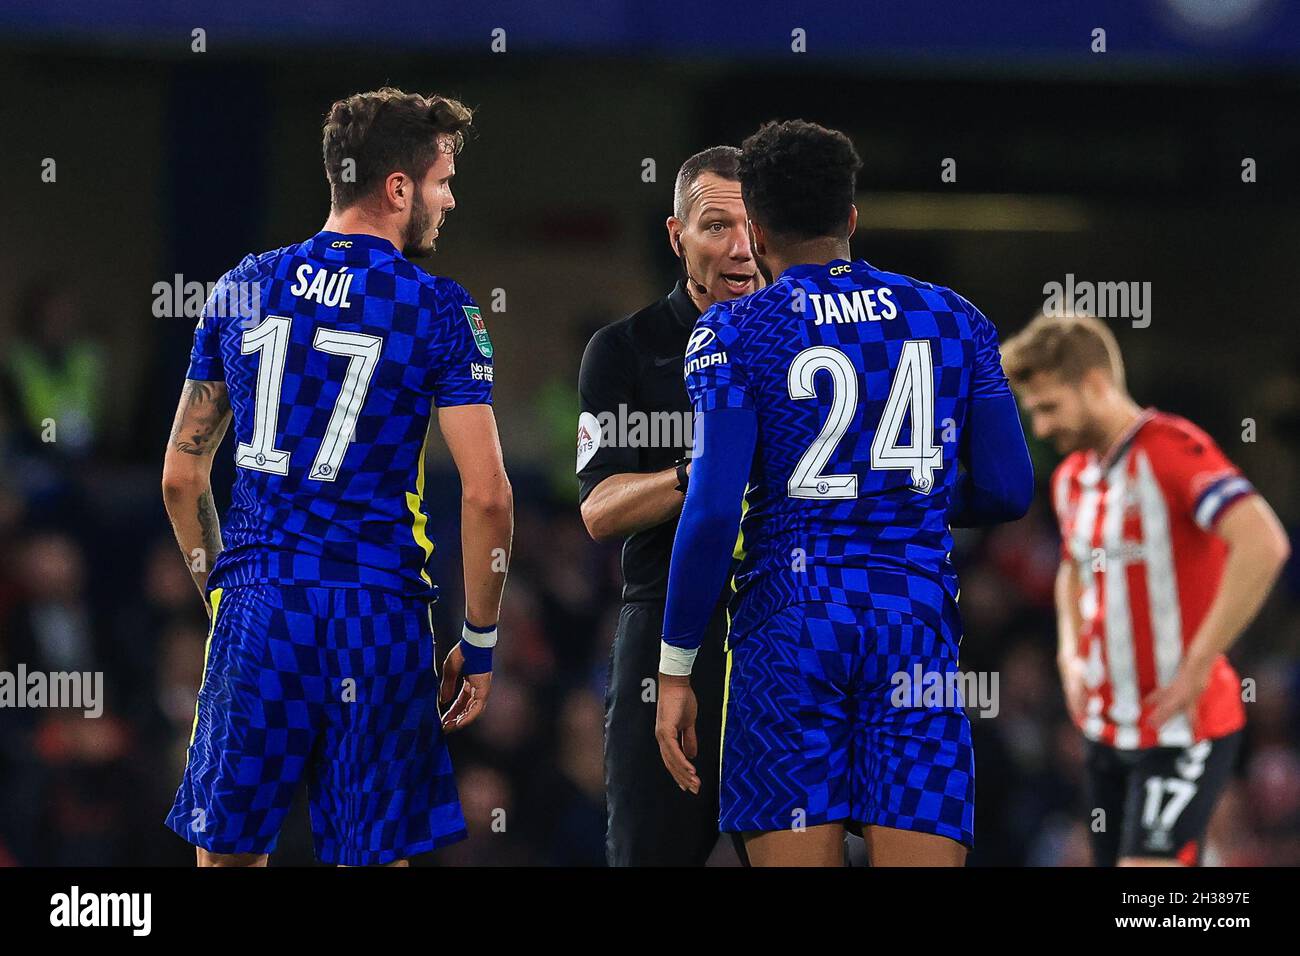 Referee Kevin Friend speaks to Reece James #24 of Chelsea in, on 10/26/2021. (Photo by Mark Cosgrove/News Images/Sipa USA) Credit: Sipa USA/Alamy Live News Stock Photo